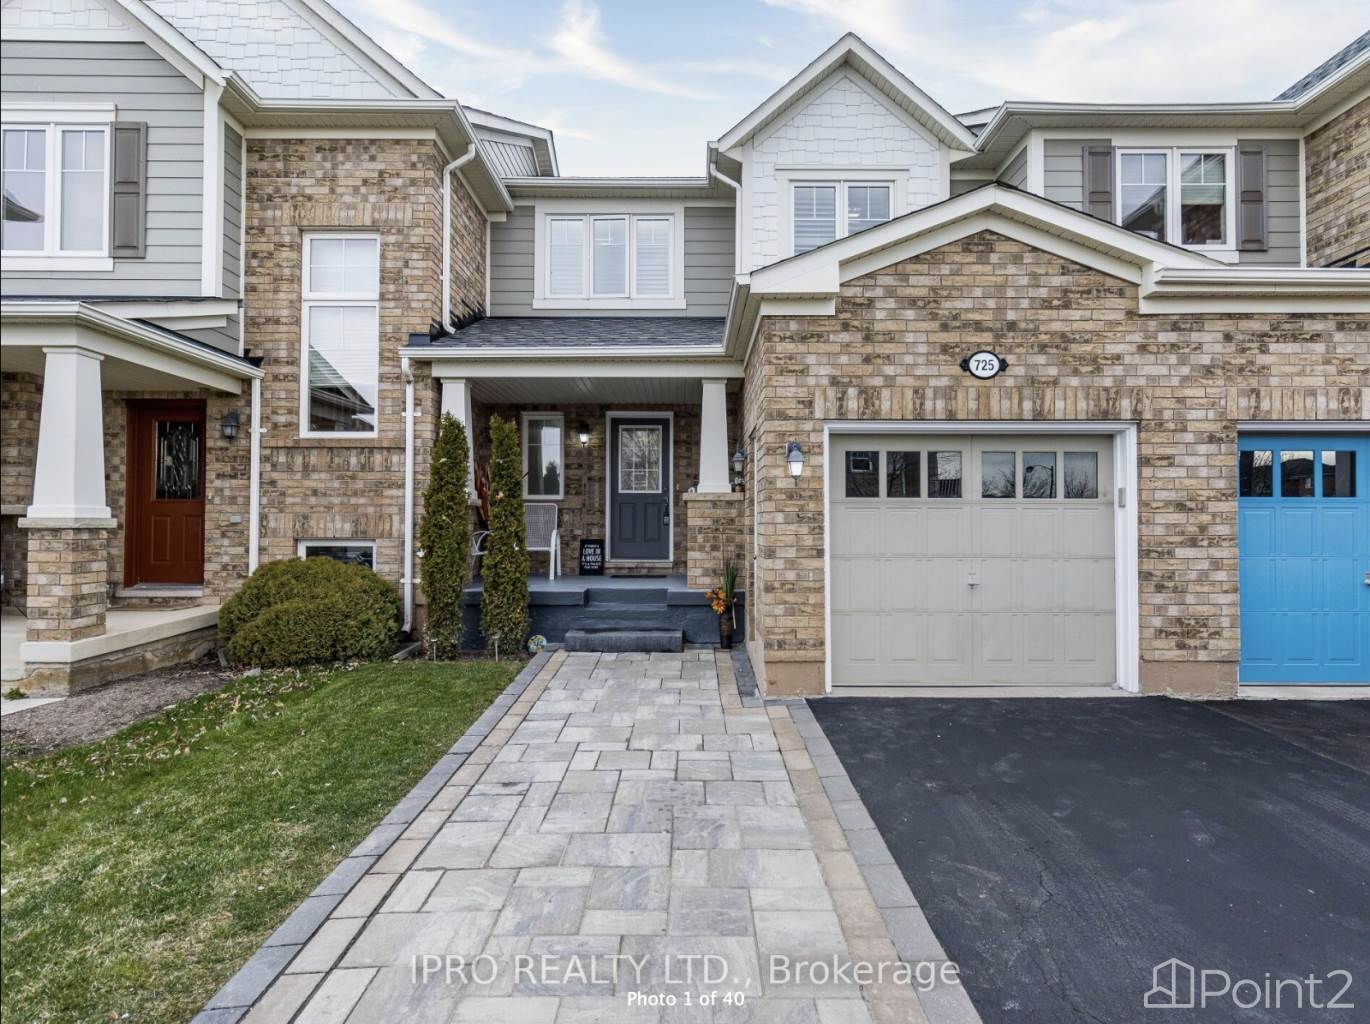 Residential Home For Sale | Milton On Freehold 3 Bed 3 Bath Townhouse For Sale | Milton | L9T0M2